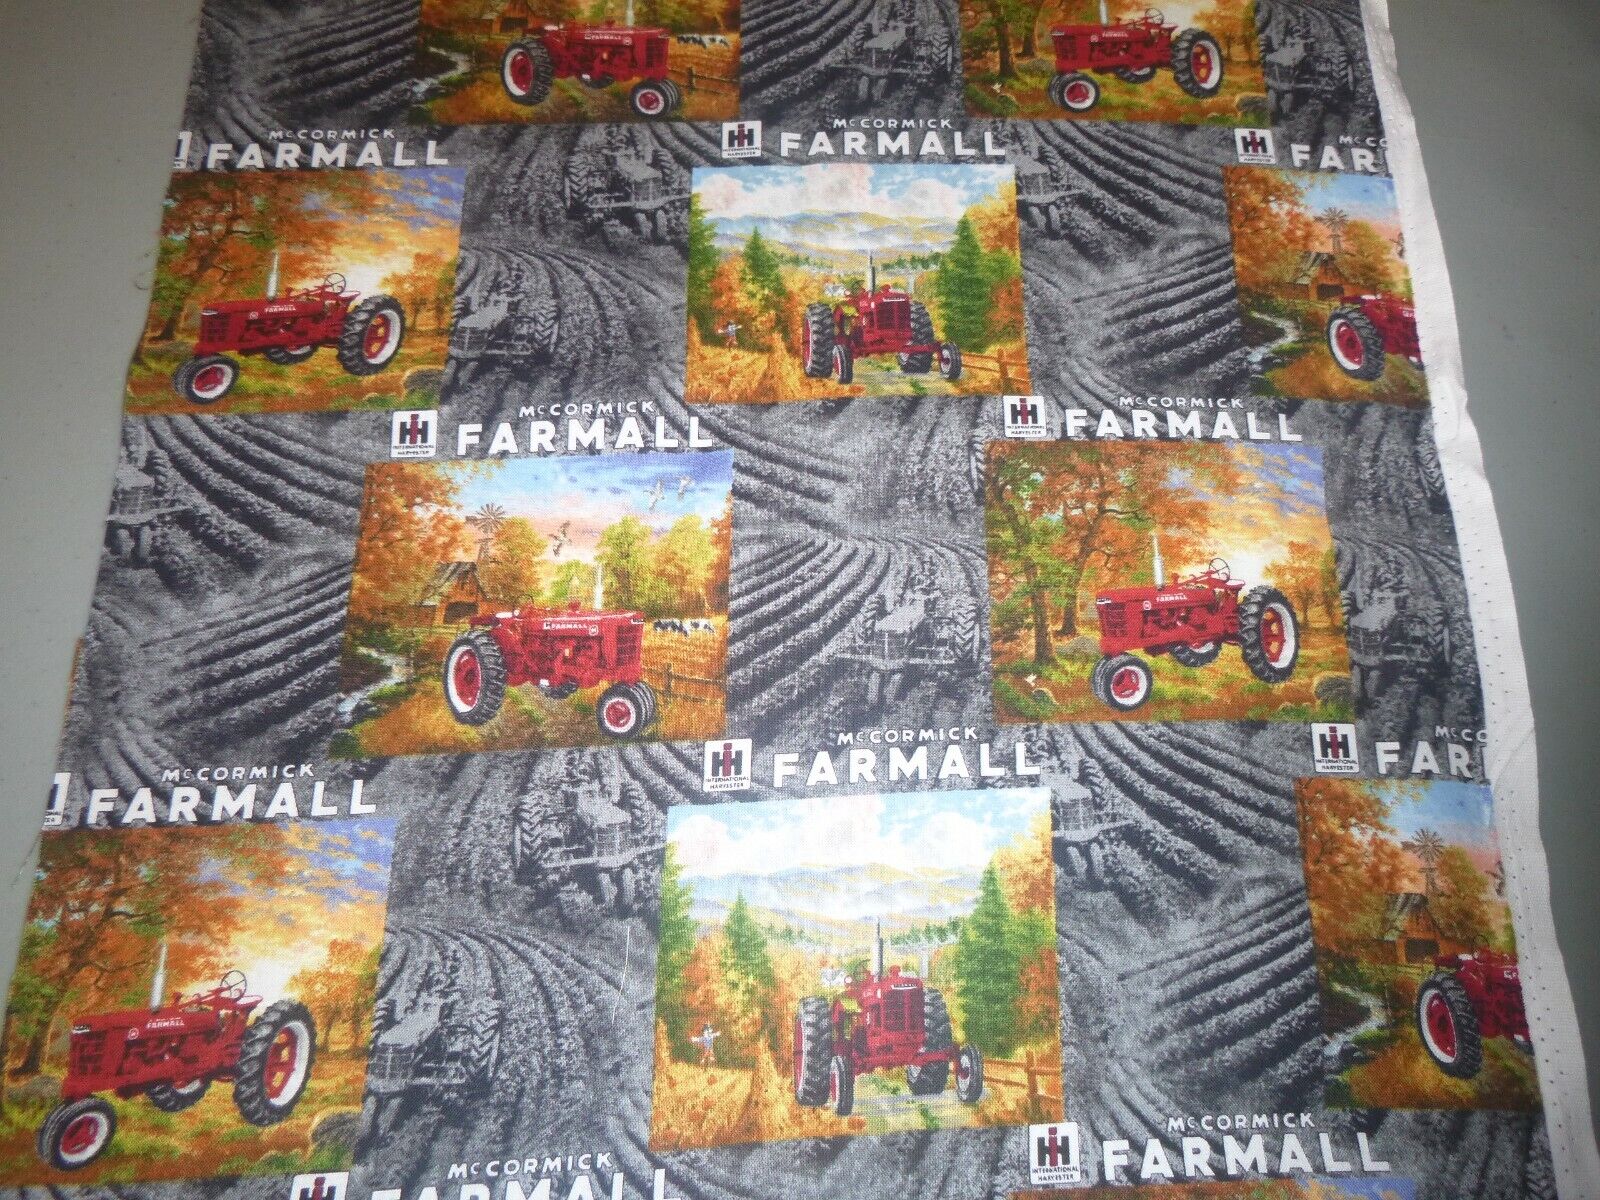 Farmall Tractor Pictures on Cotton Fabric -15 INCHES WIDE and 36 INCHES LONG